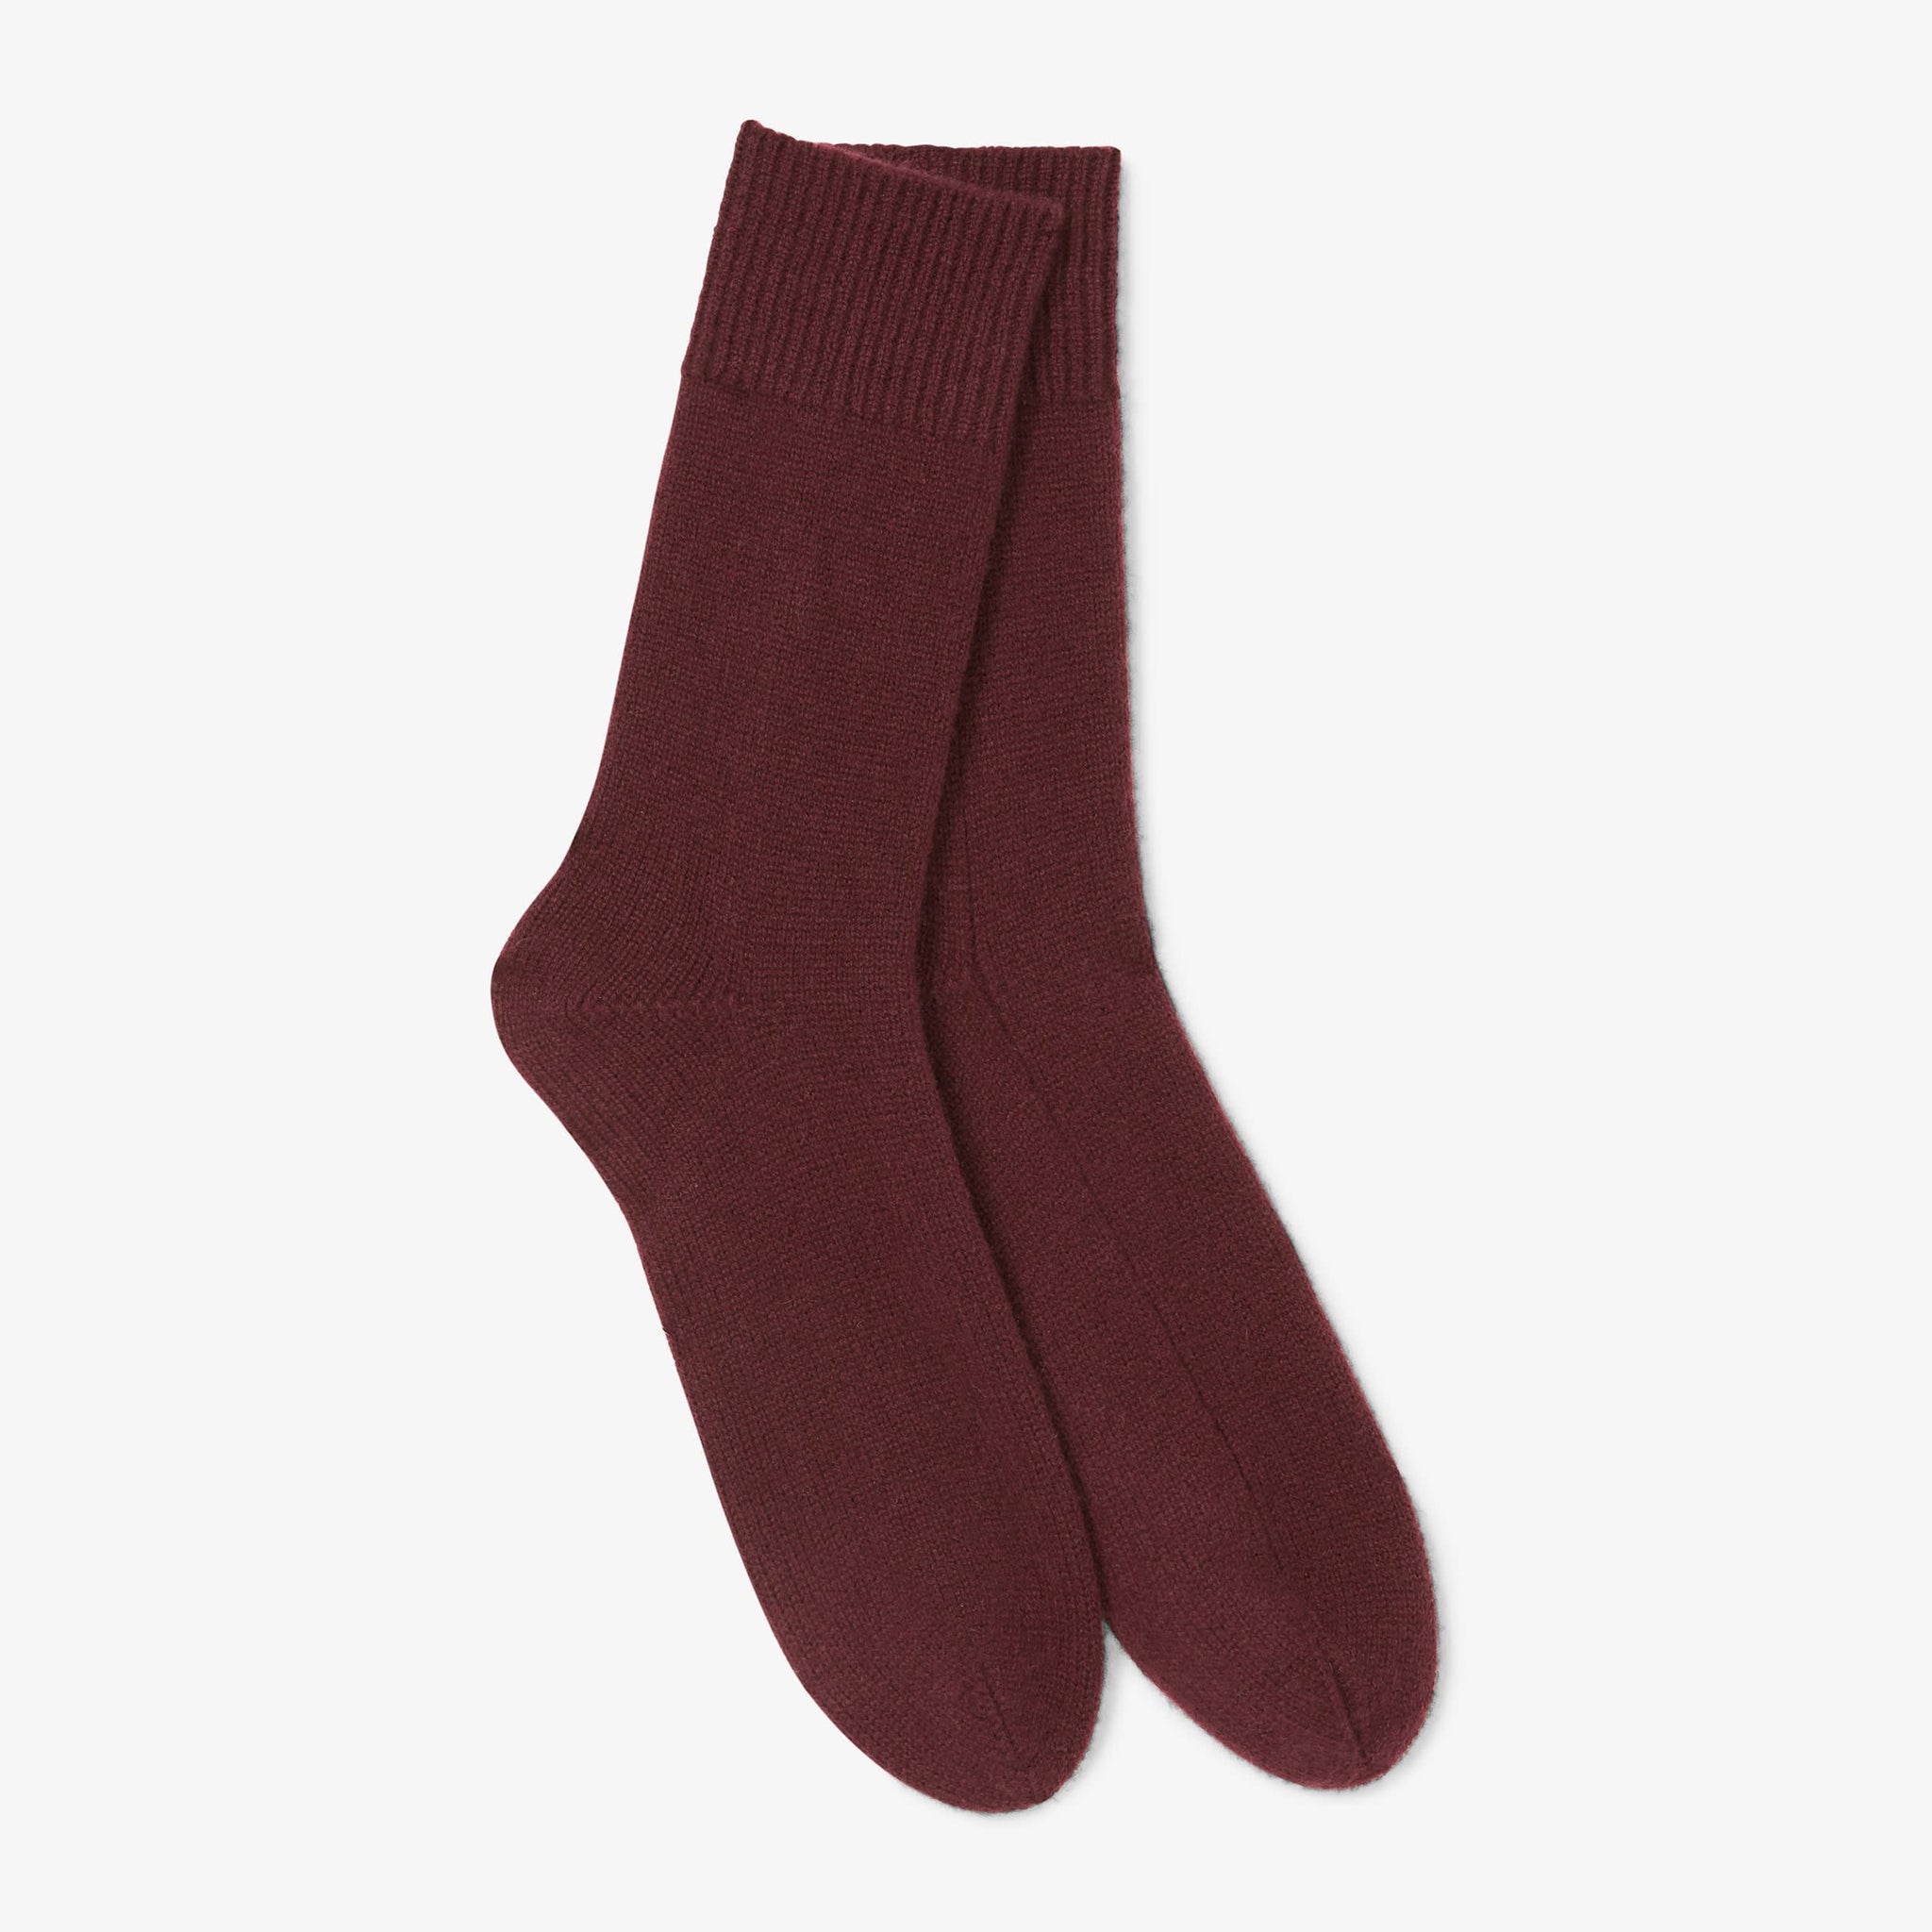 Packshot image of the ribbed cashmere socks in chiante 